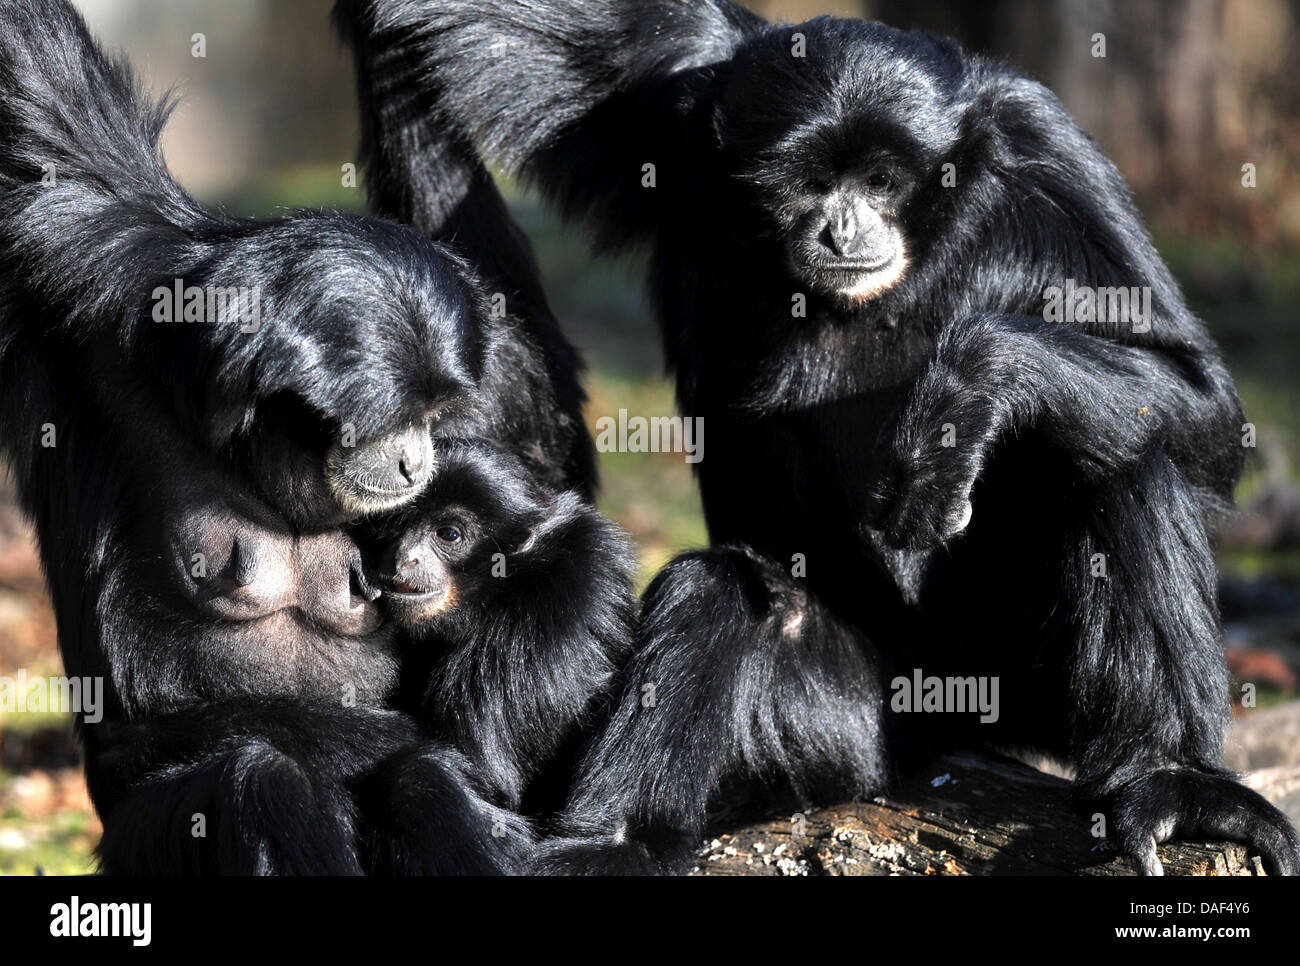 A siamang family sits in the sun in Hellabrunn animal park in Munich, Germany, 02 December 2011. The siamang is the largest of the gibbons. Photo: Frank Leonhardt Stock Photo